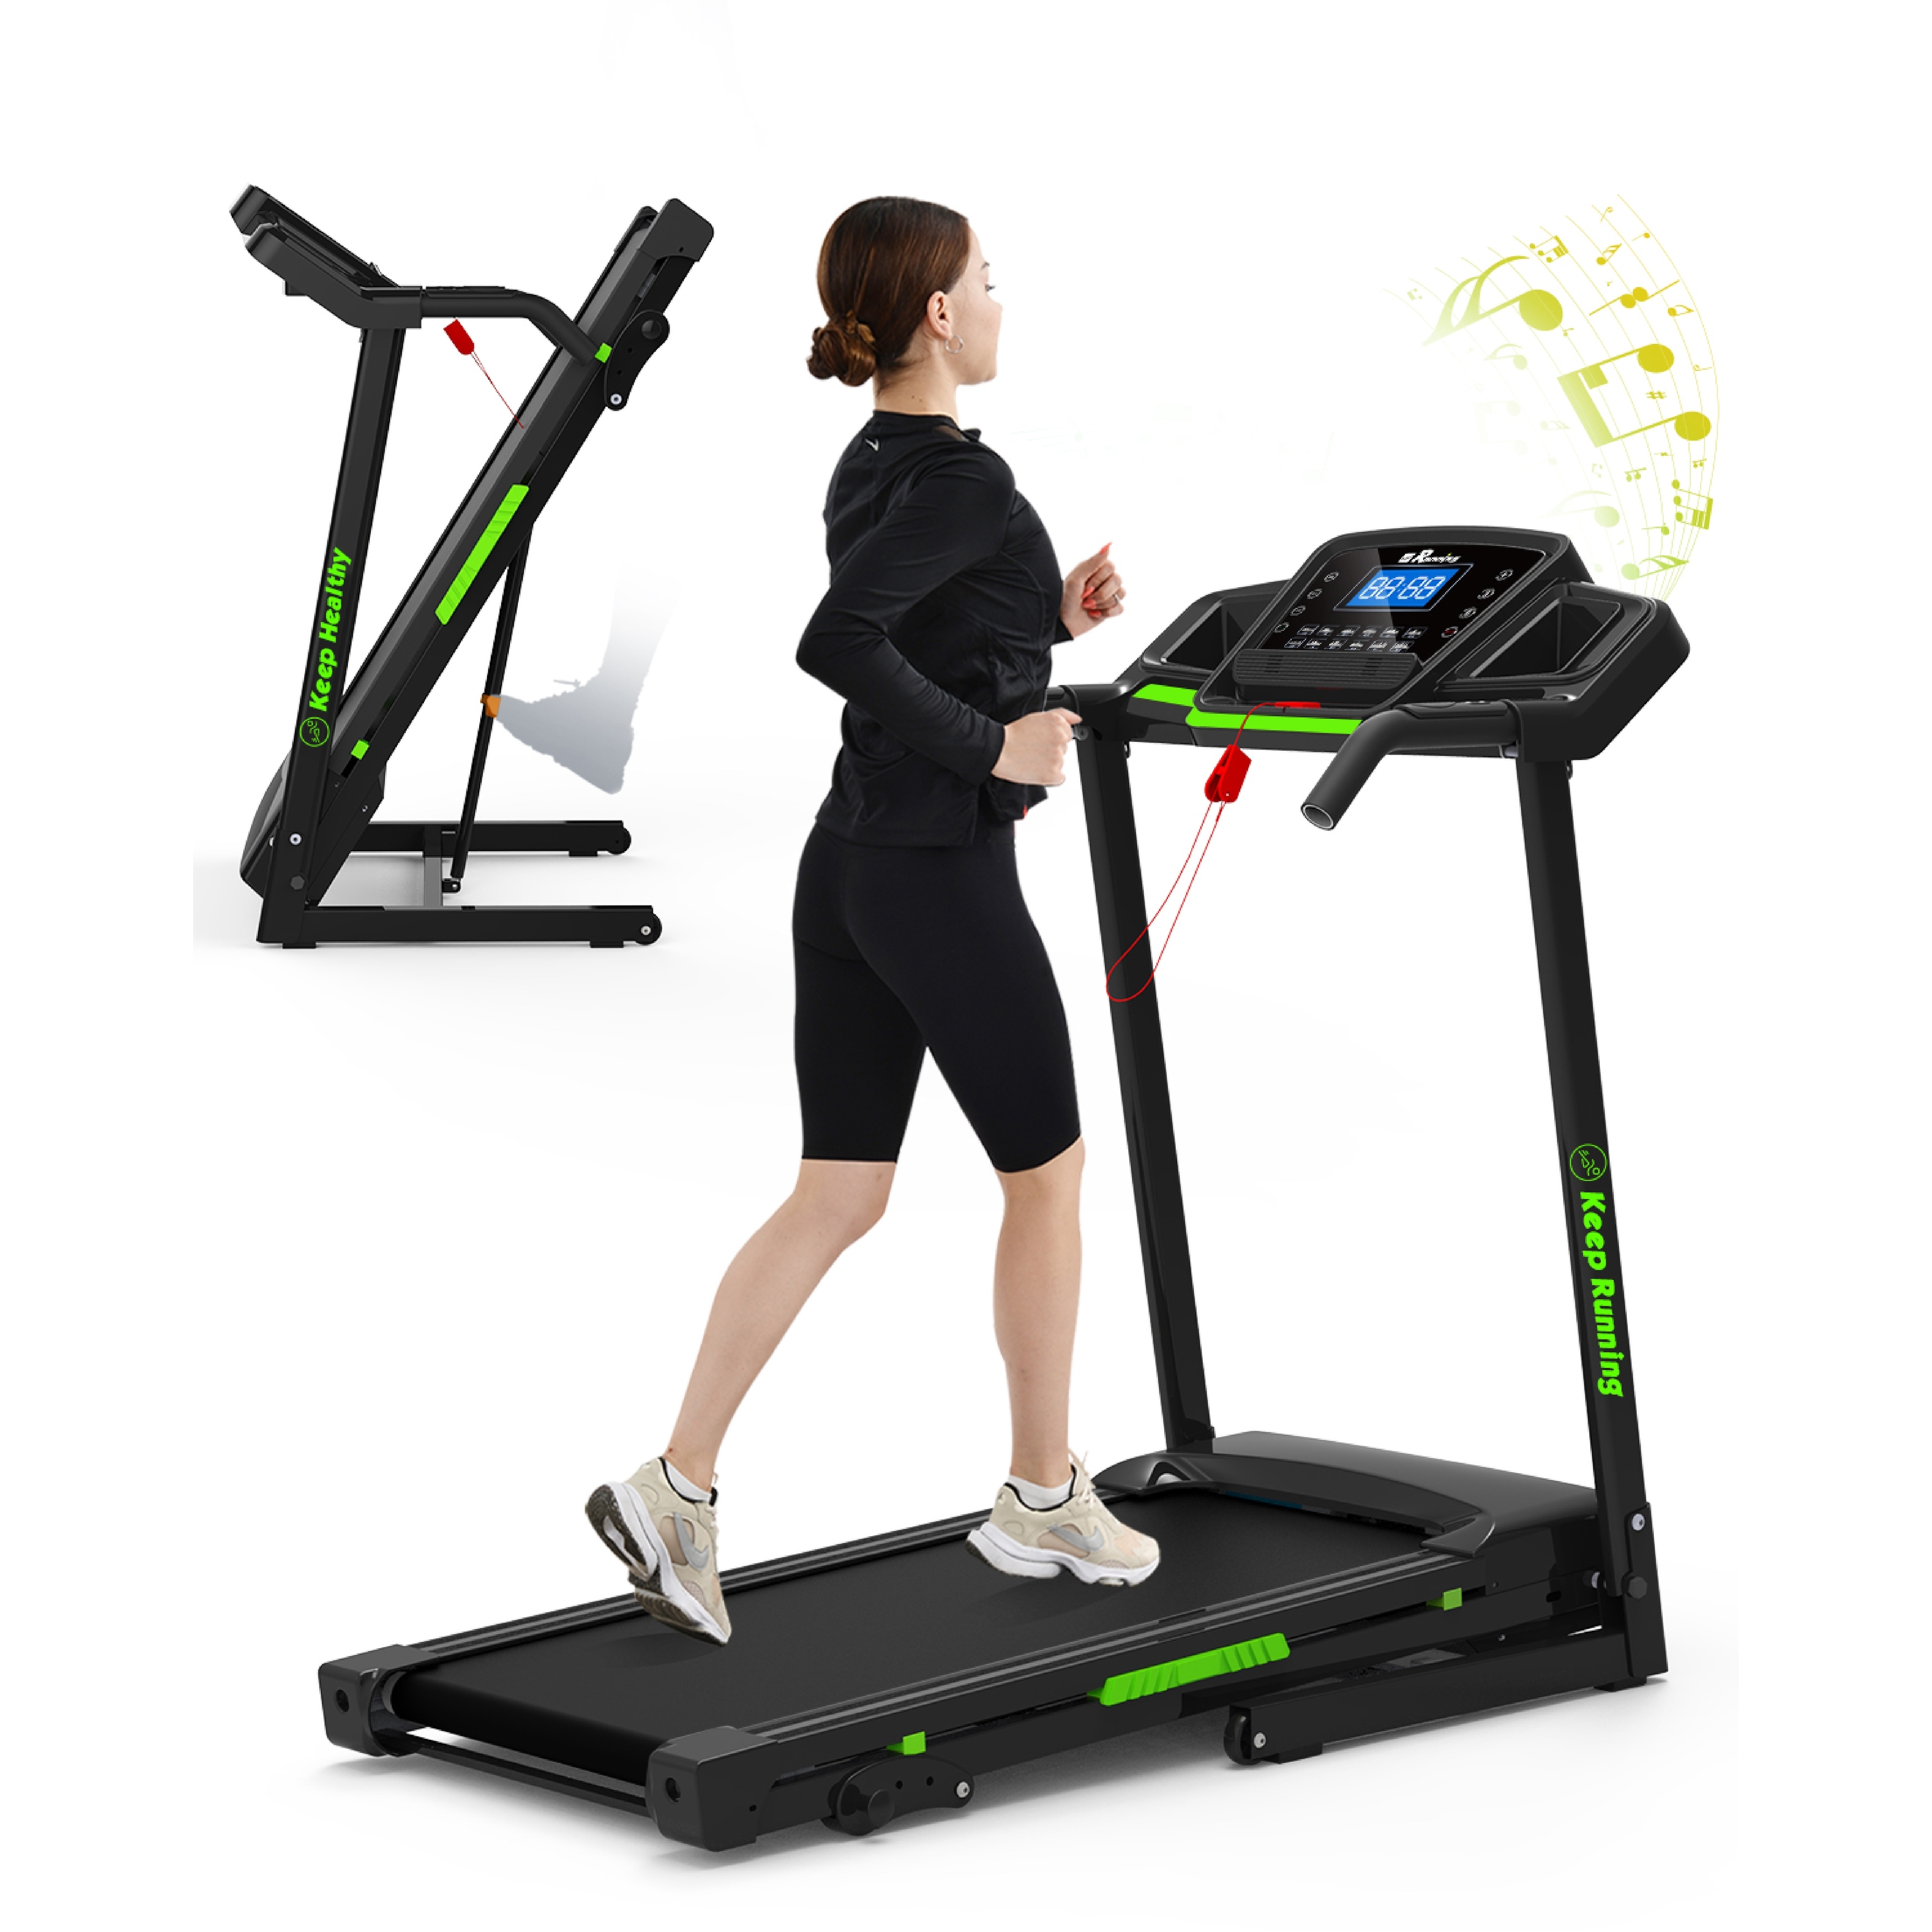  Treadmill,Treadmill for Home,Max 2.5 HP Folding Incline  Treadmills for Exercise with LCD Monitor 3 Levels Manual Incline 12 Preset  Program Max Speed 7.5MPH Fitness Gym Machine Black : Sports & Outdoors